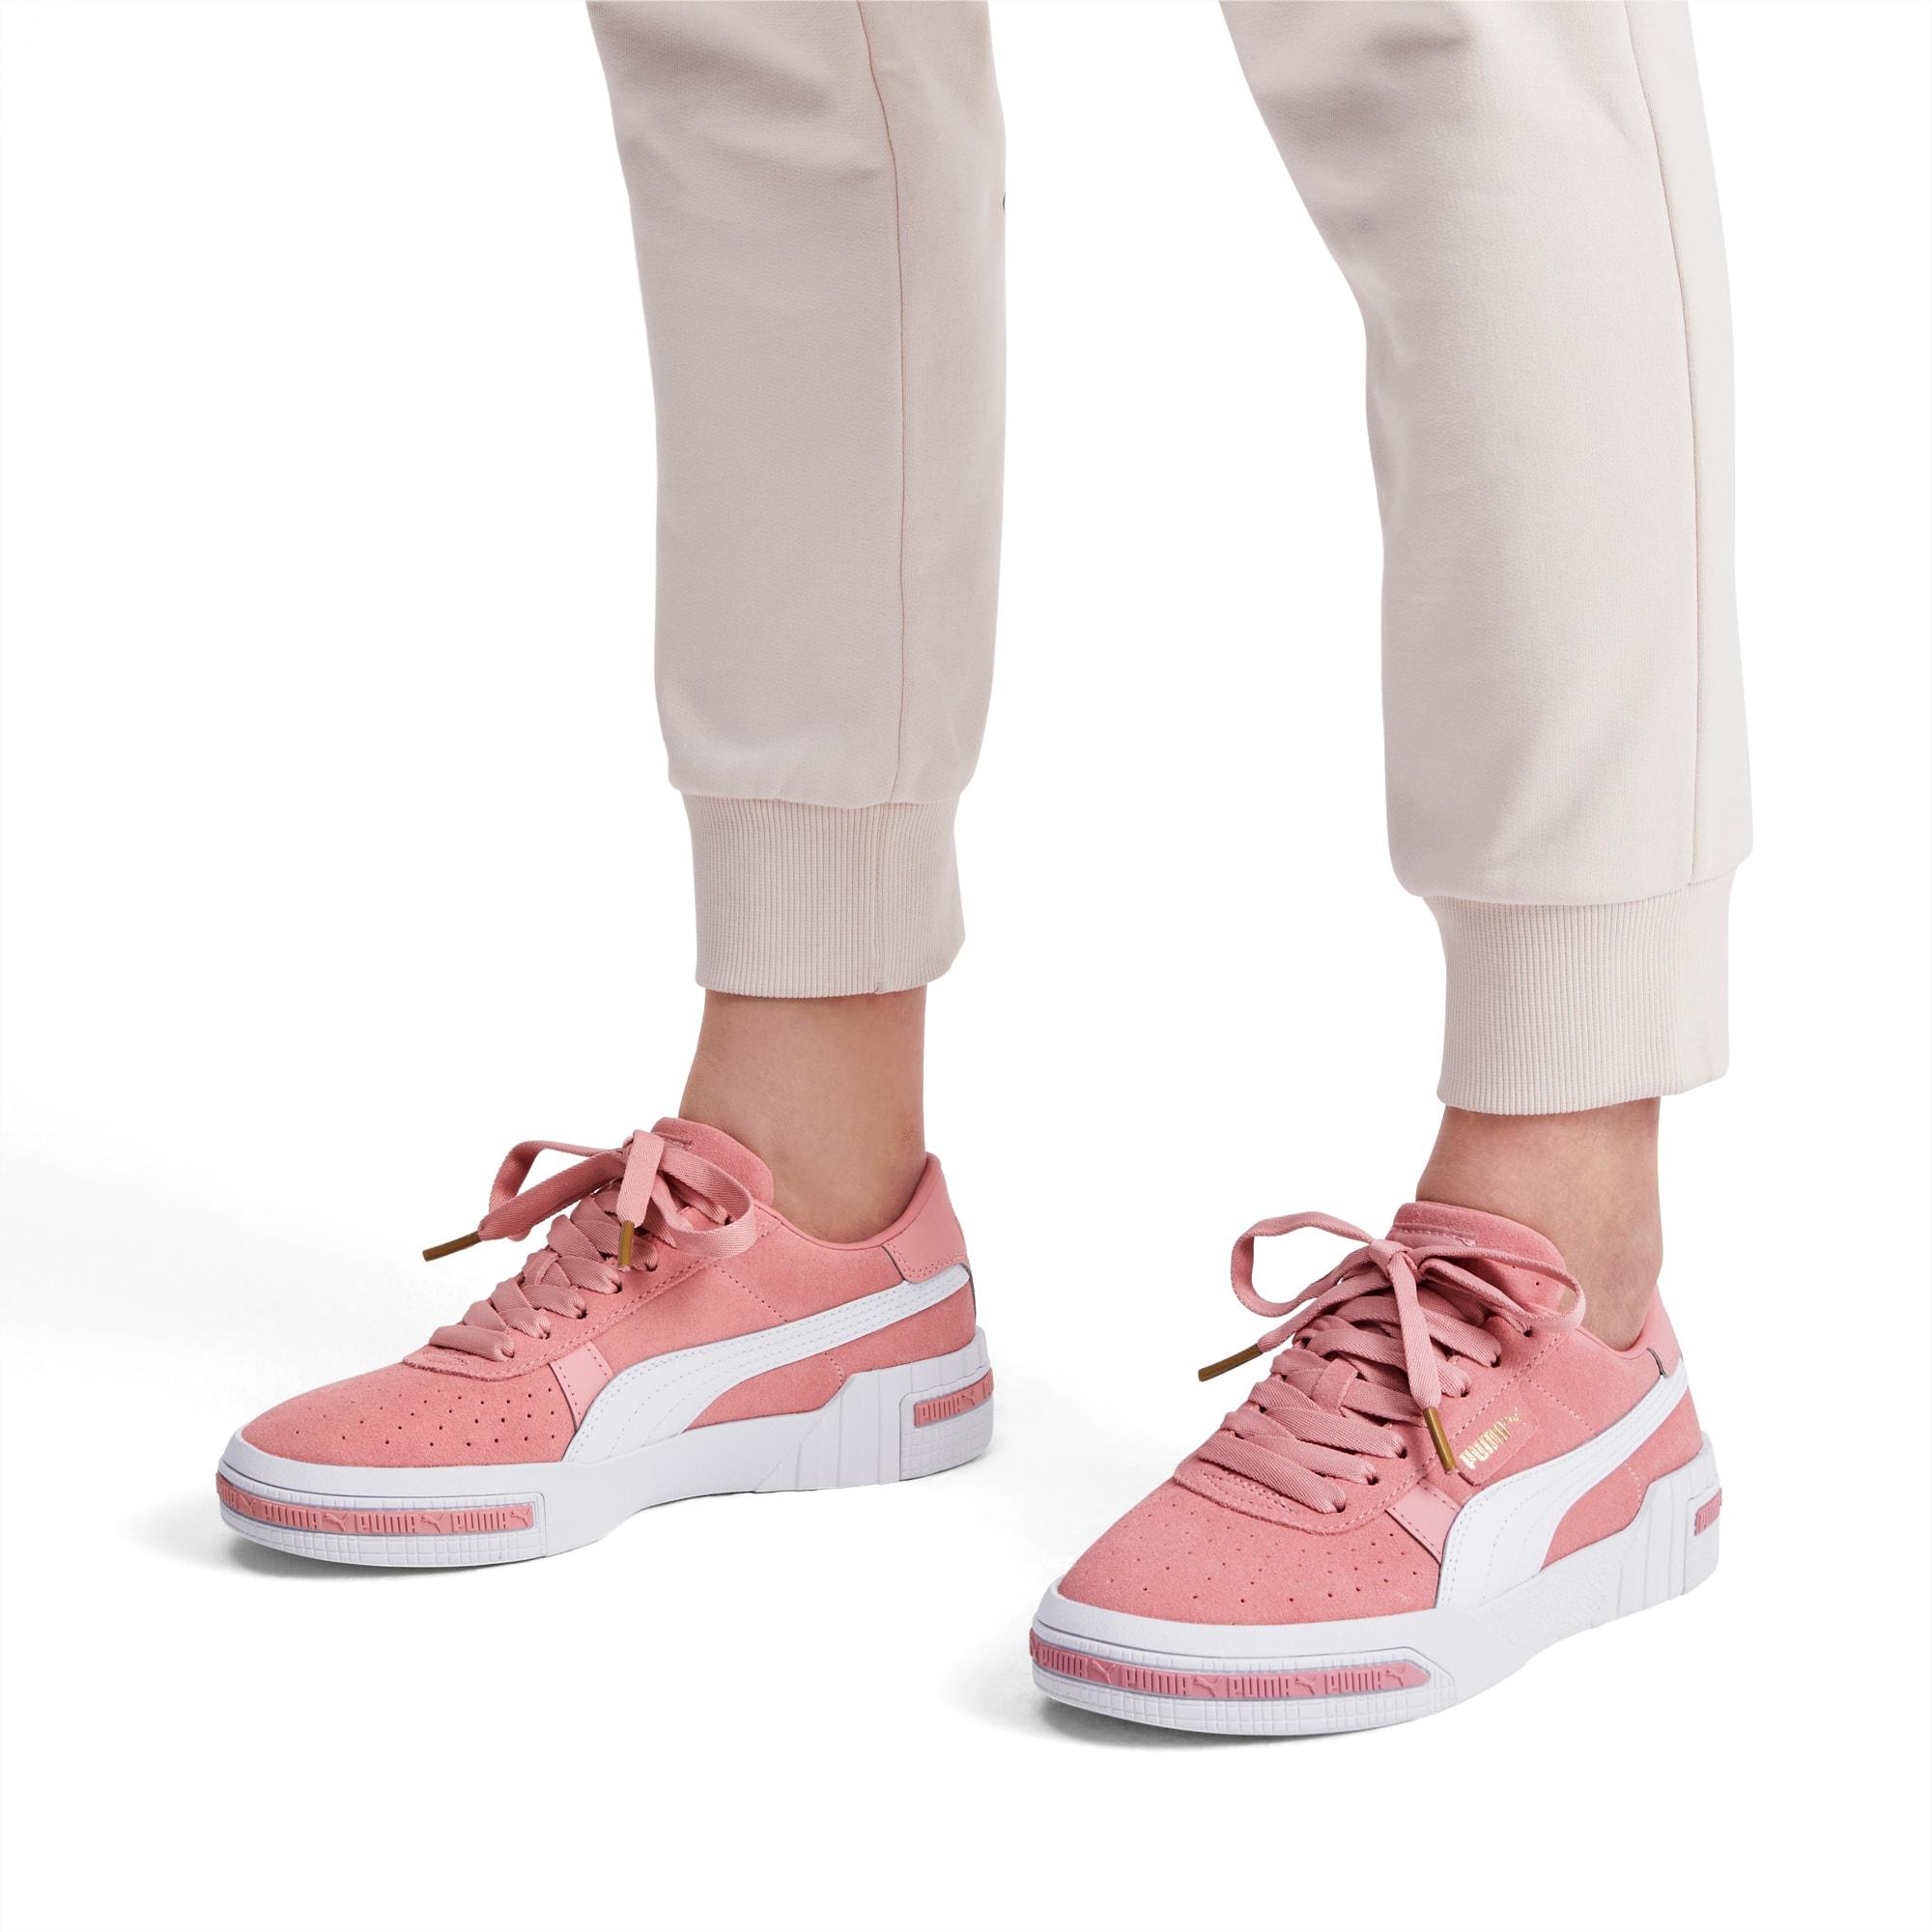 Suede Cali Taped Sneakers in Pink Lyst